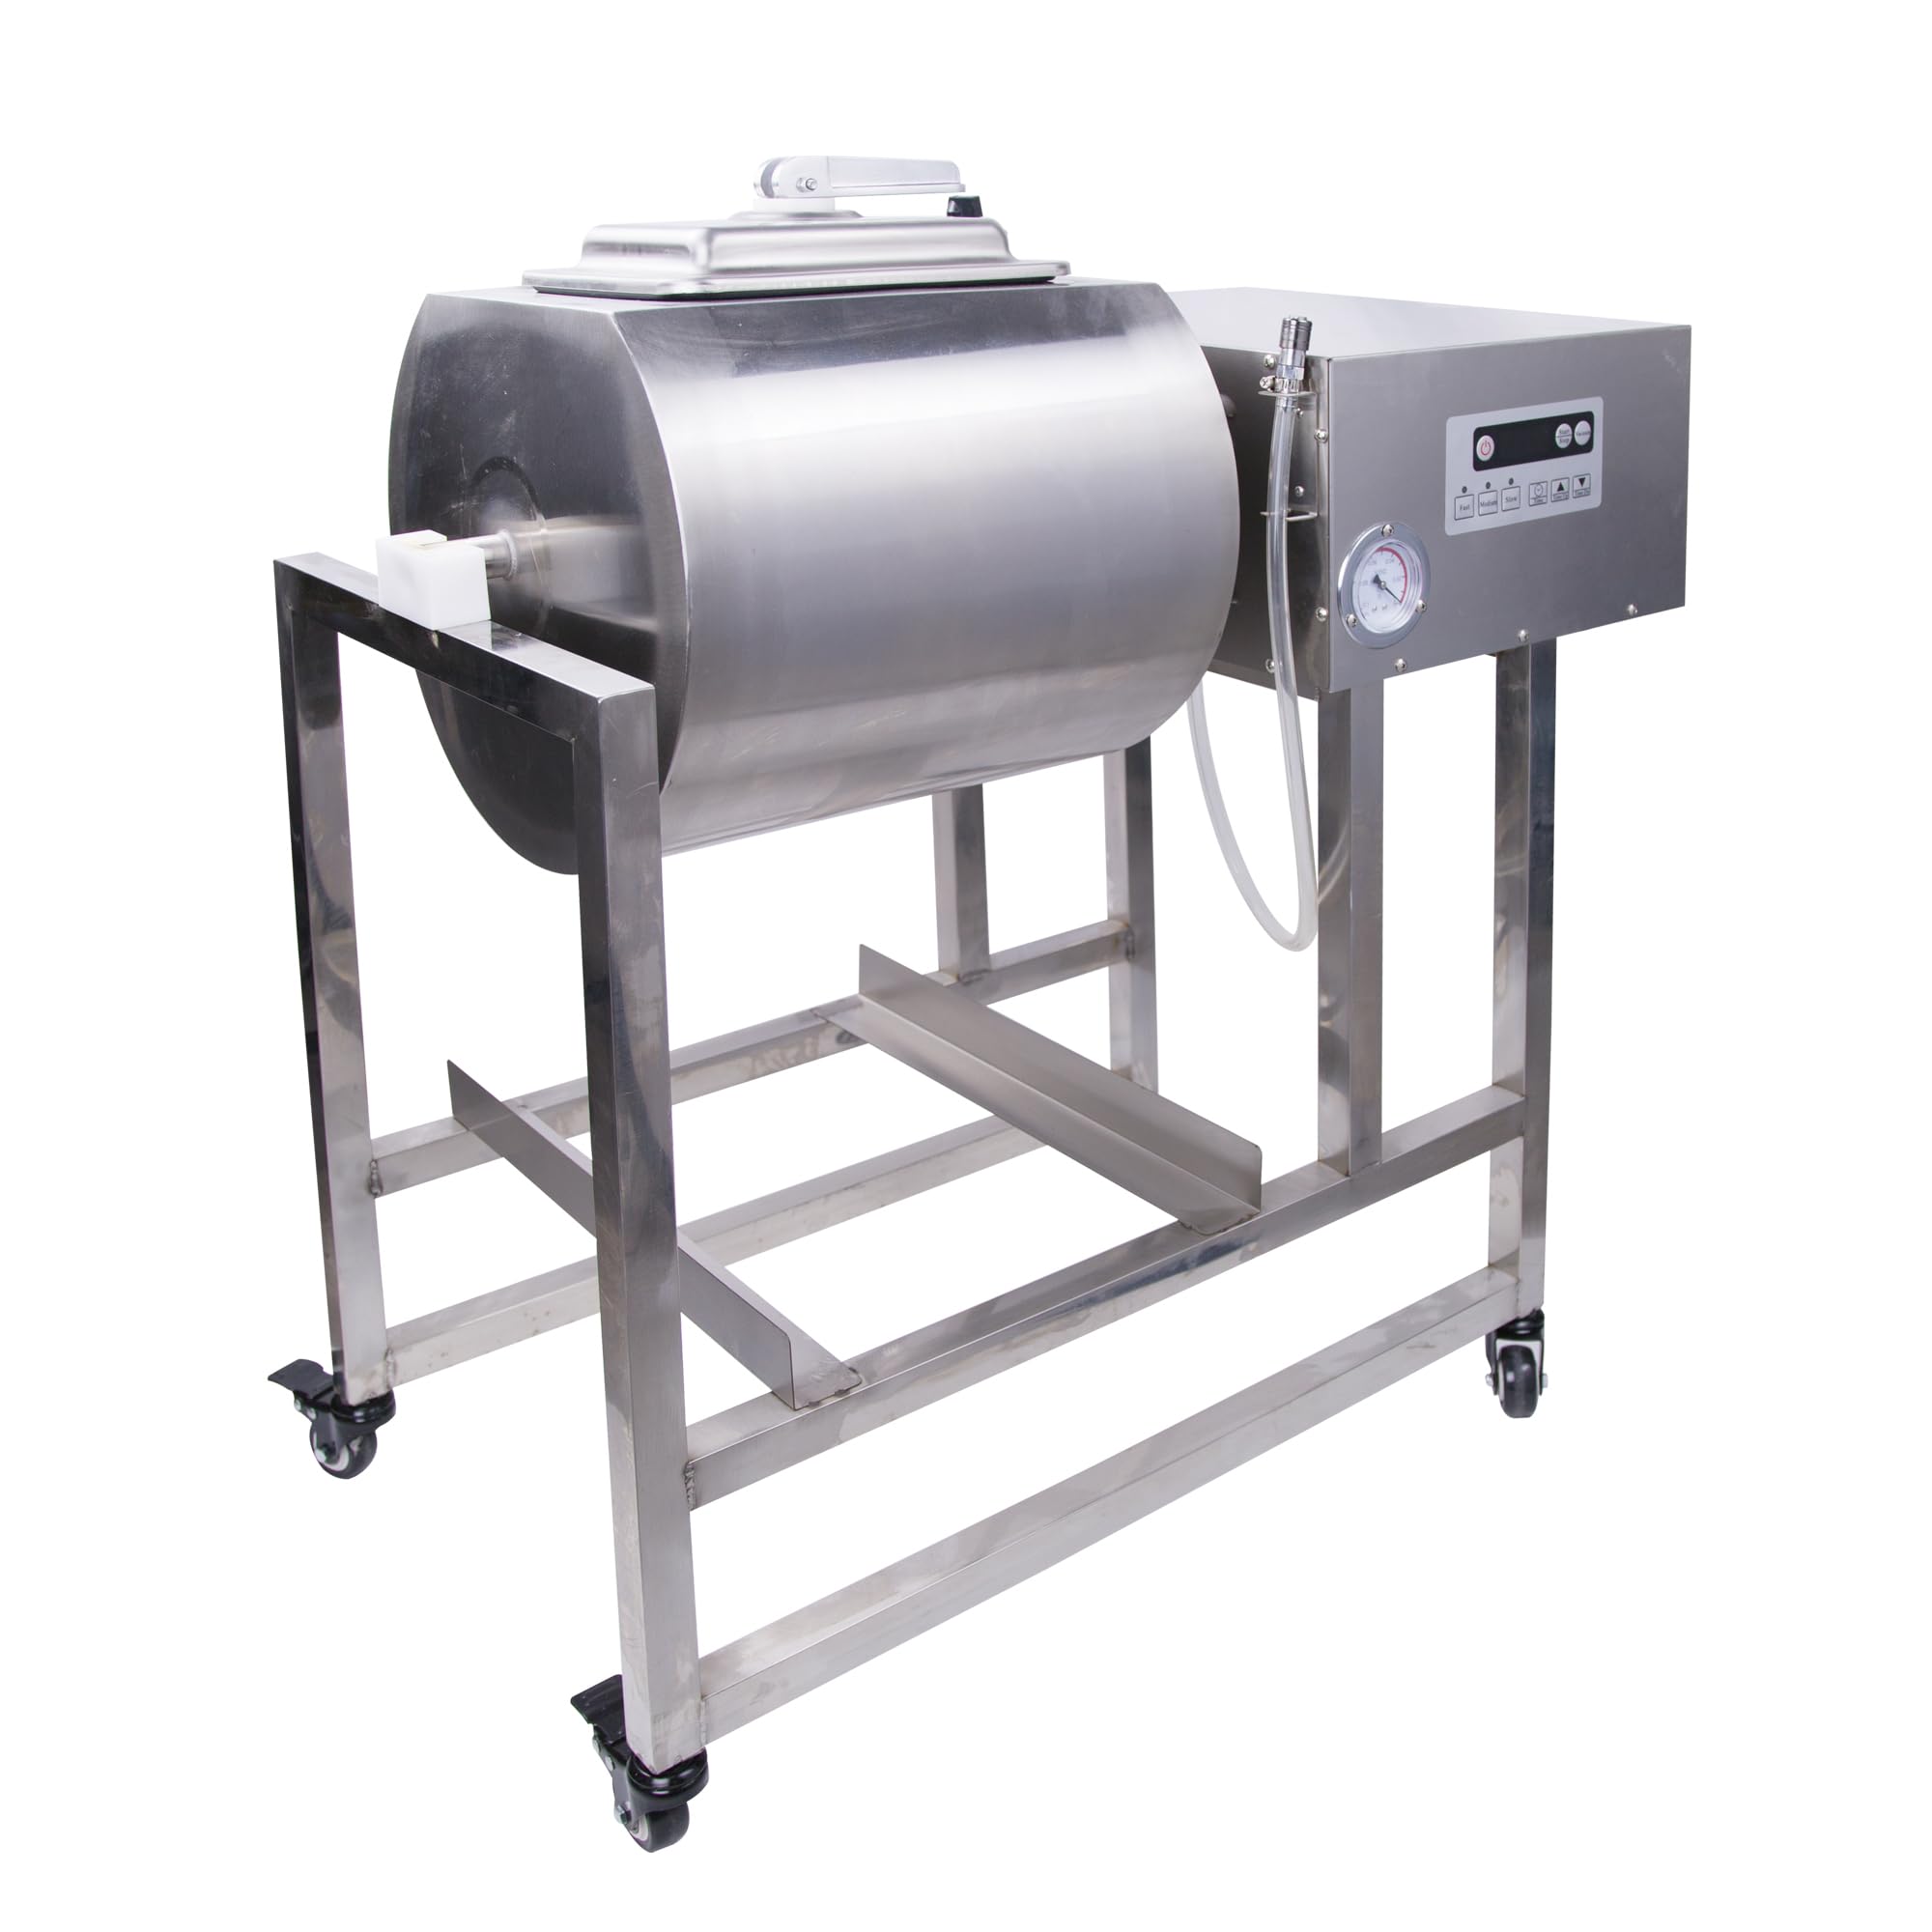 Hakka Commercial Meat Tumbler 90lb/45 liters - Vacuum Curing Machine for Jerky, Sausage, Bacon & More - Stainless Steel Food-Grade Tumbling Marinator w/Bidirectional Rotation & Speed Control